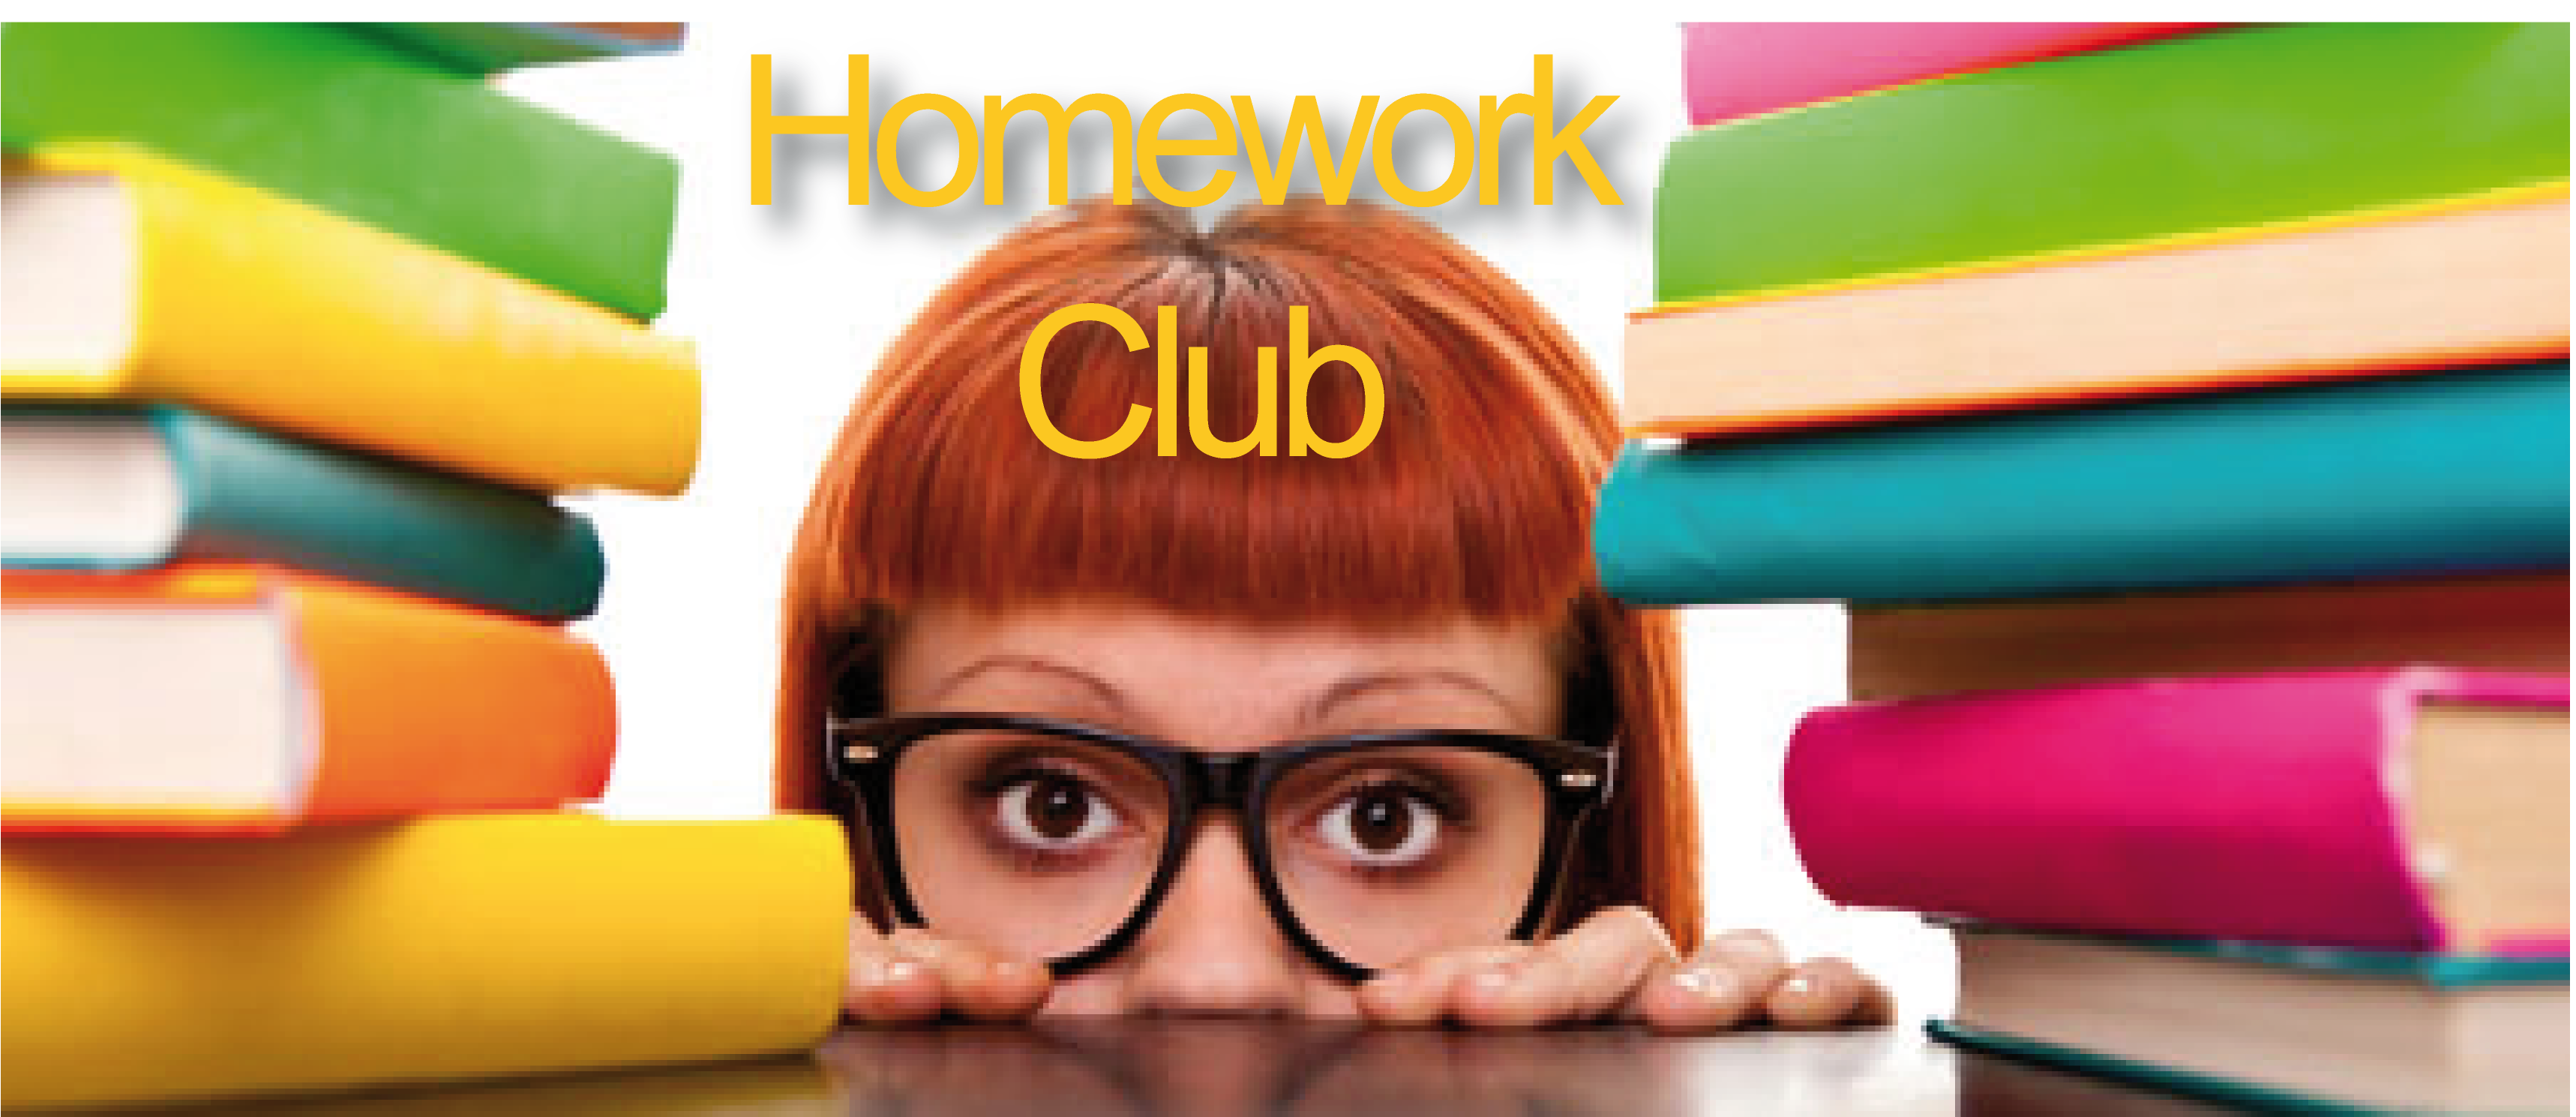 what is the homework club